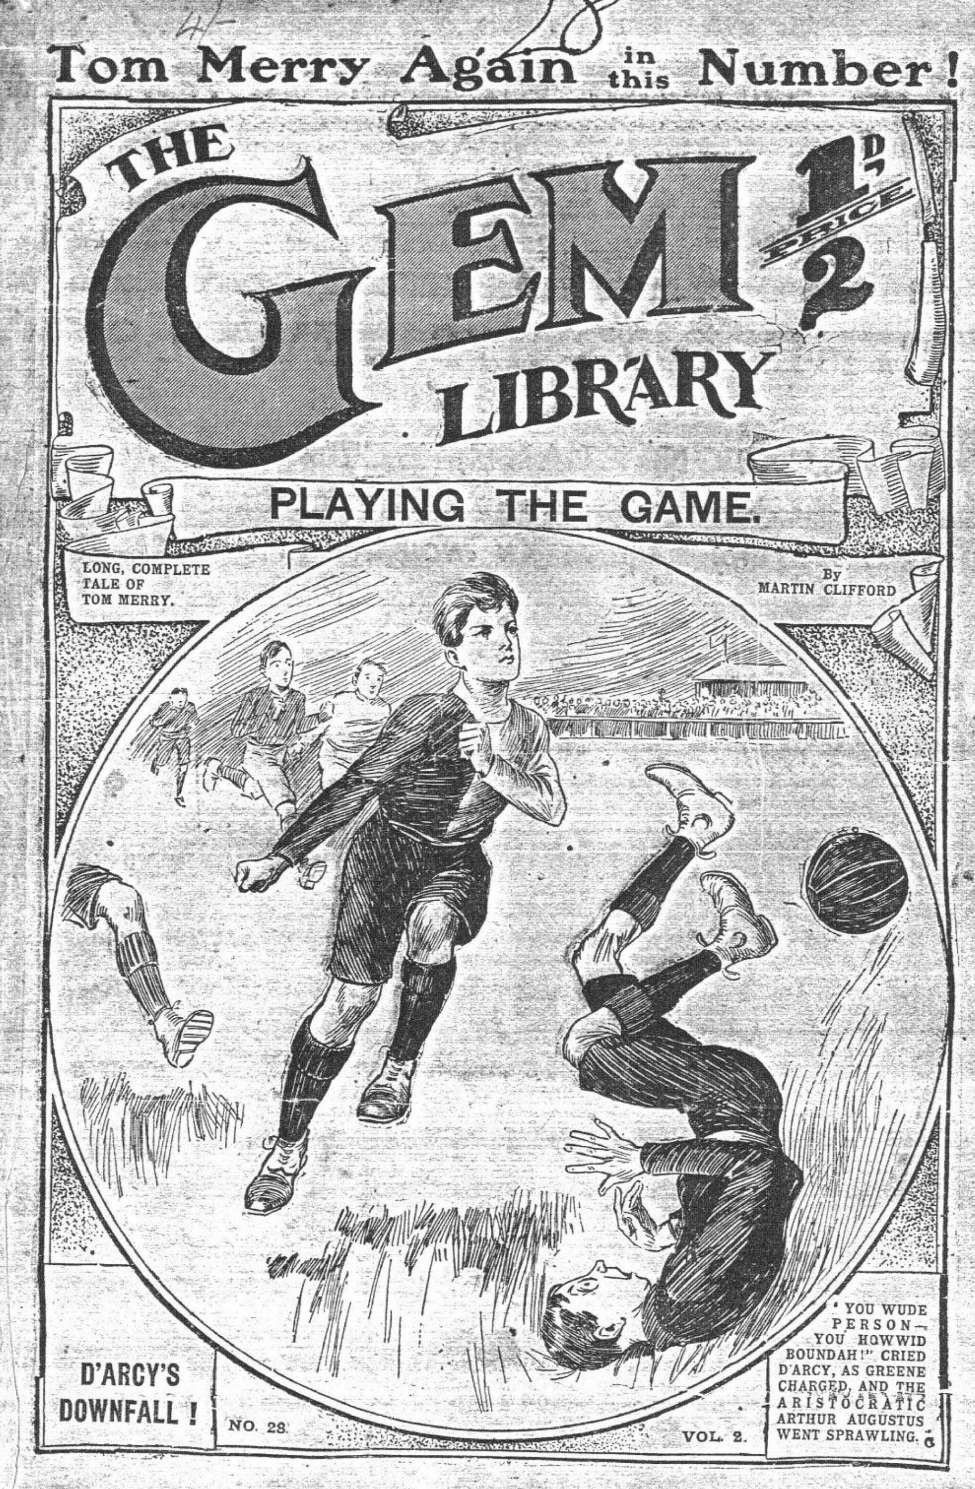 Book Cover For The Gem v1 28 - Playing the Game